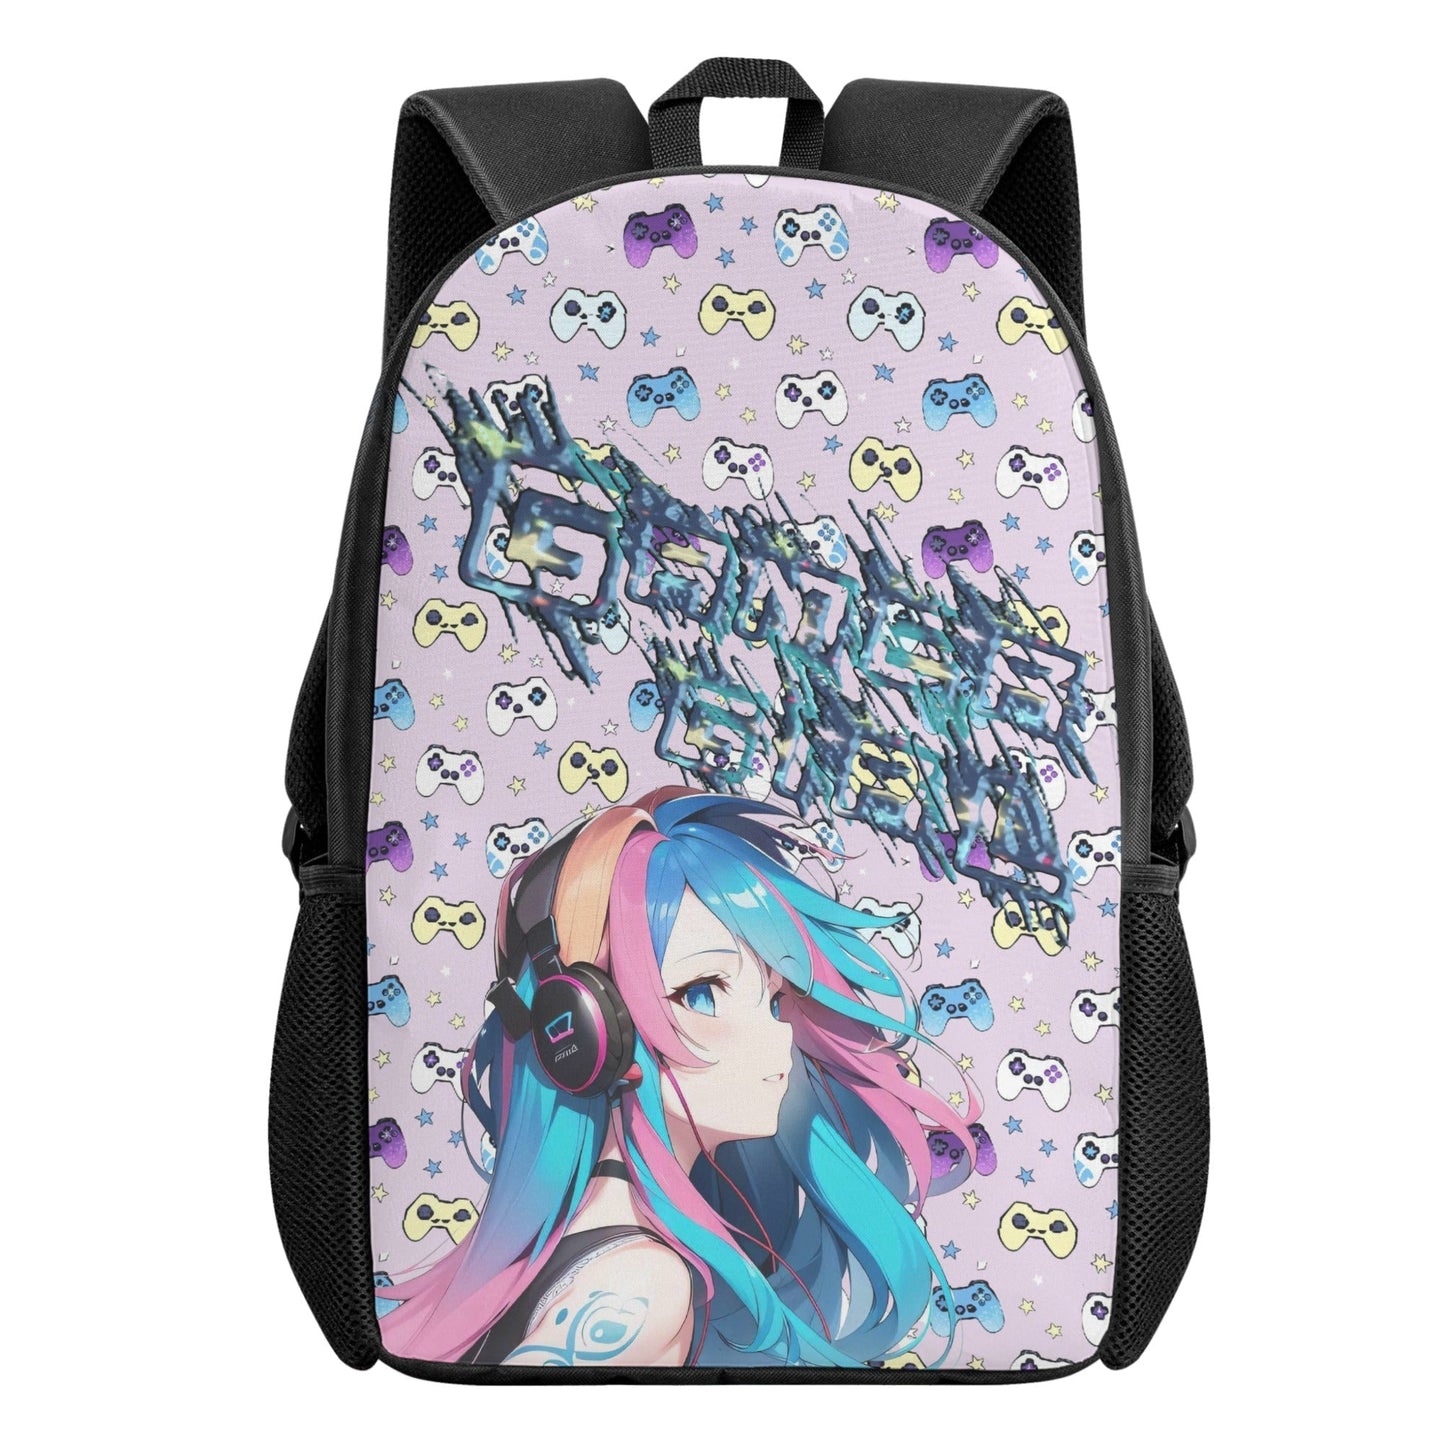 Stand out  with the  Gammer Girl Kids Backpack  available at Hey Nugget. Grab yours today!